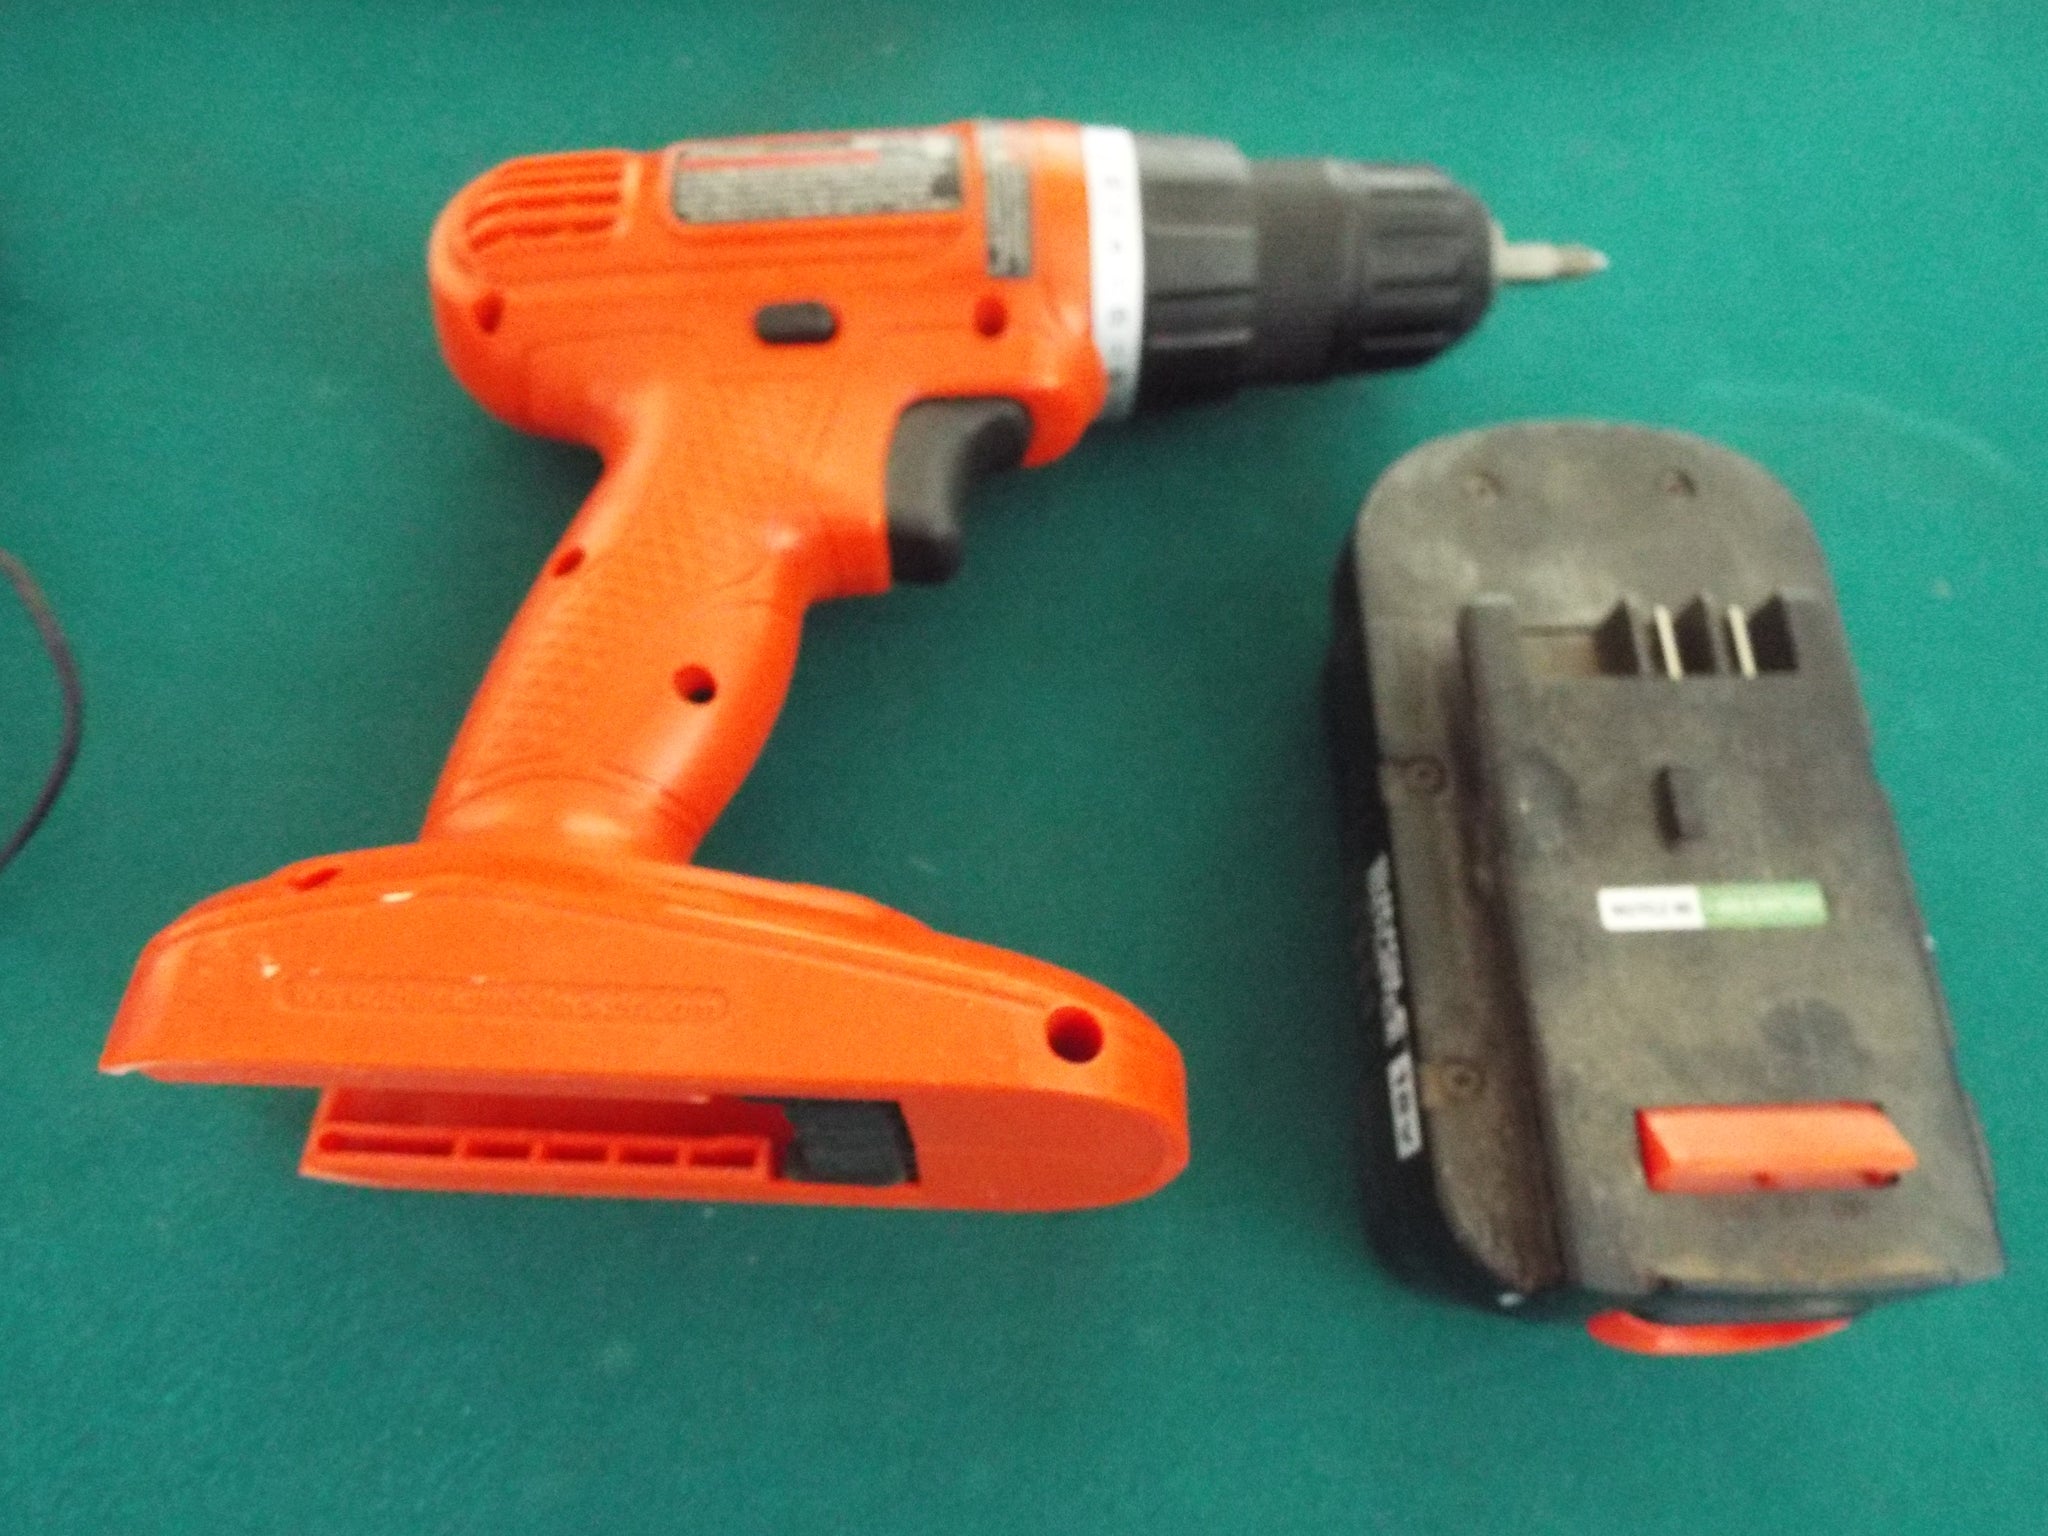 Black and Decker Drill: Best use as a screw driller. Okay as a